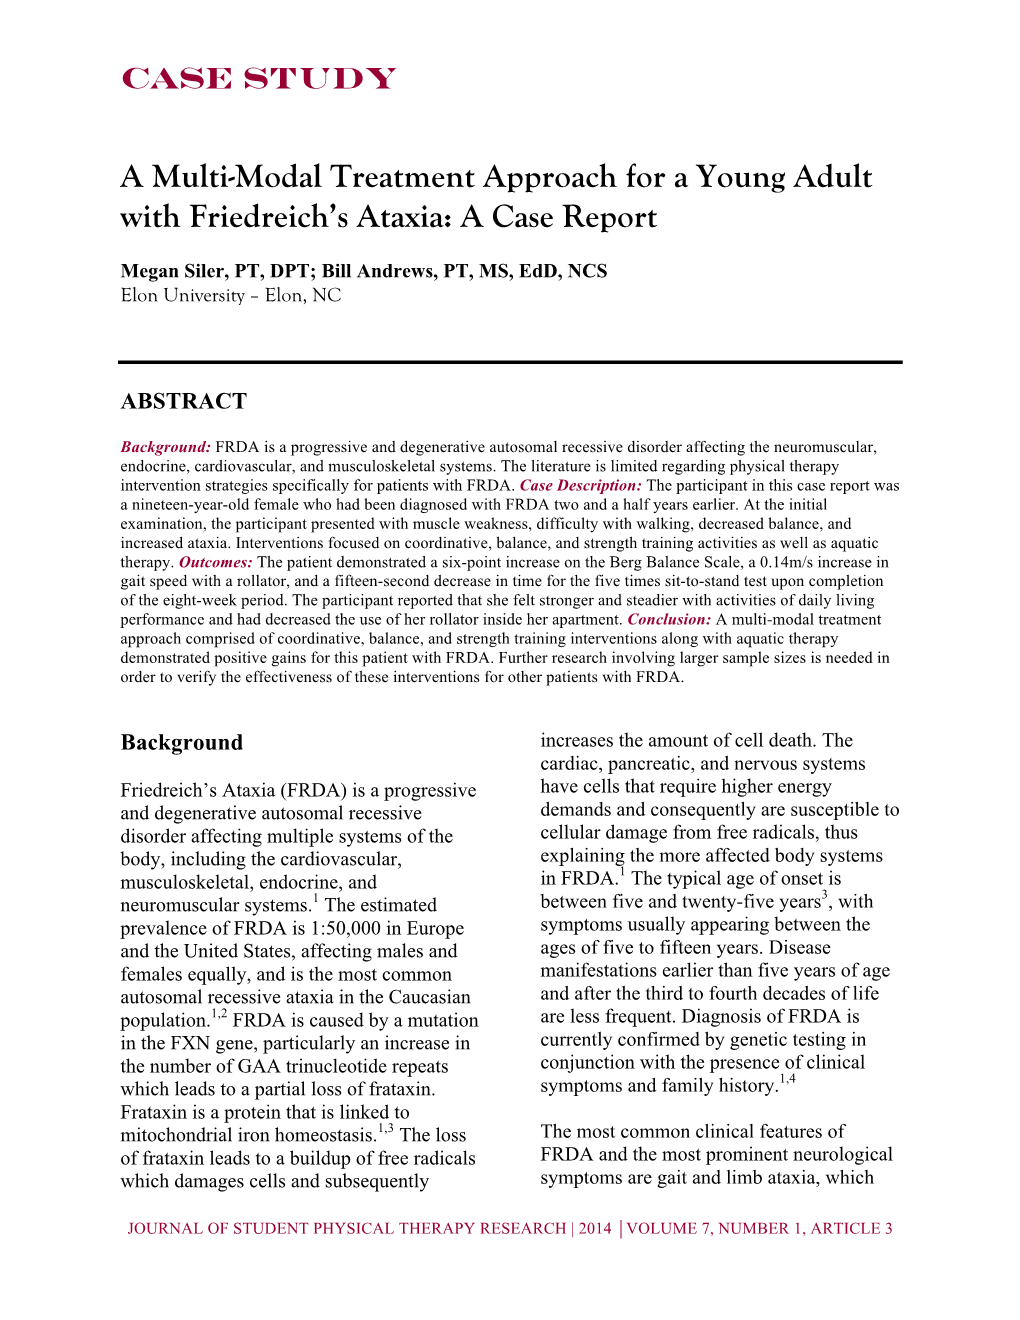 A Multi-Modal Treatment Approach for a Young Adult with Friedreich's Ataxia